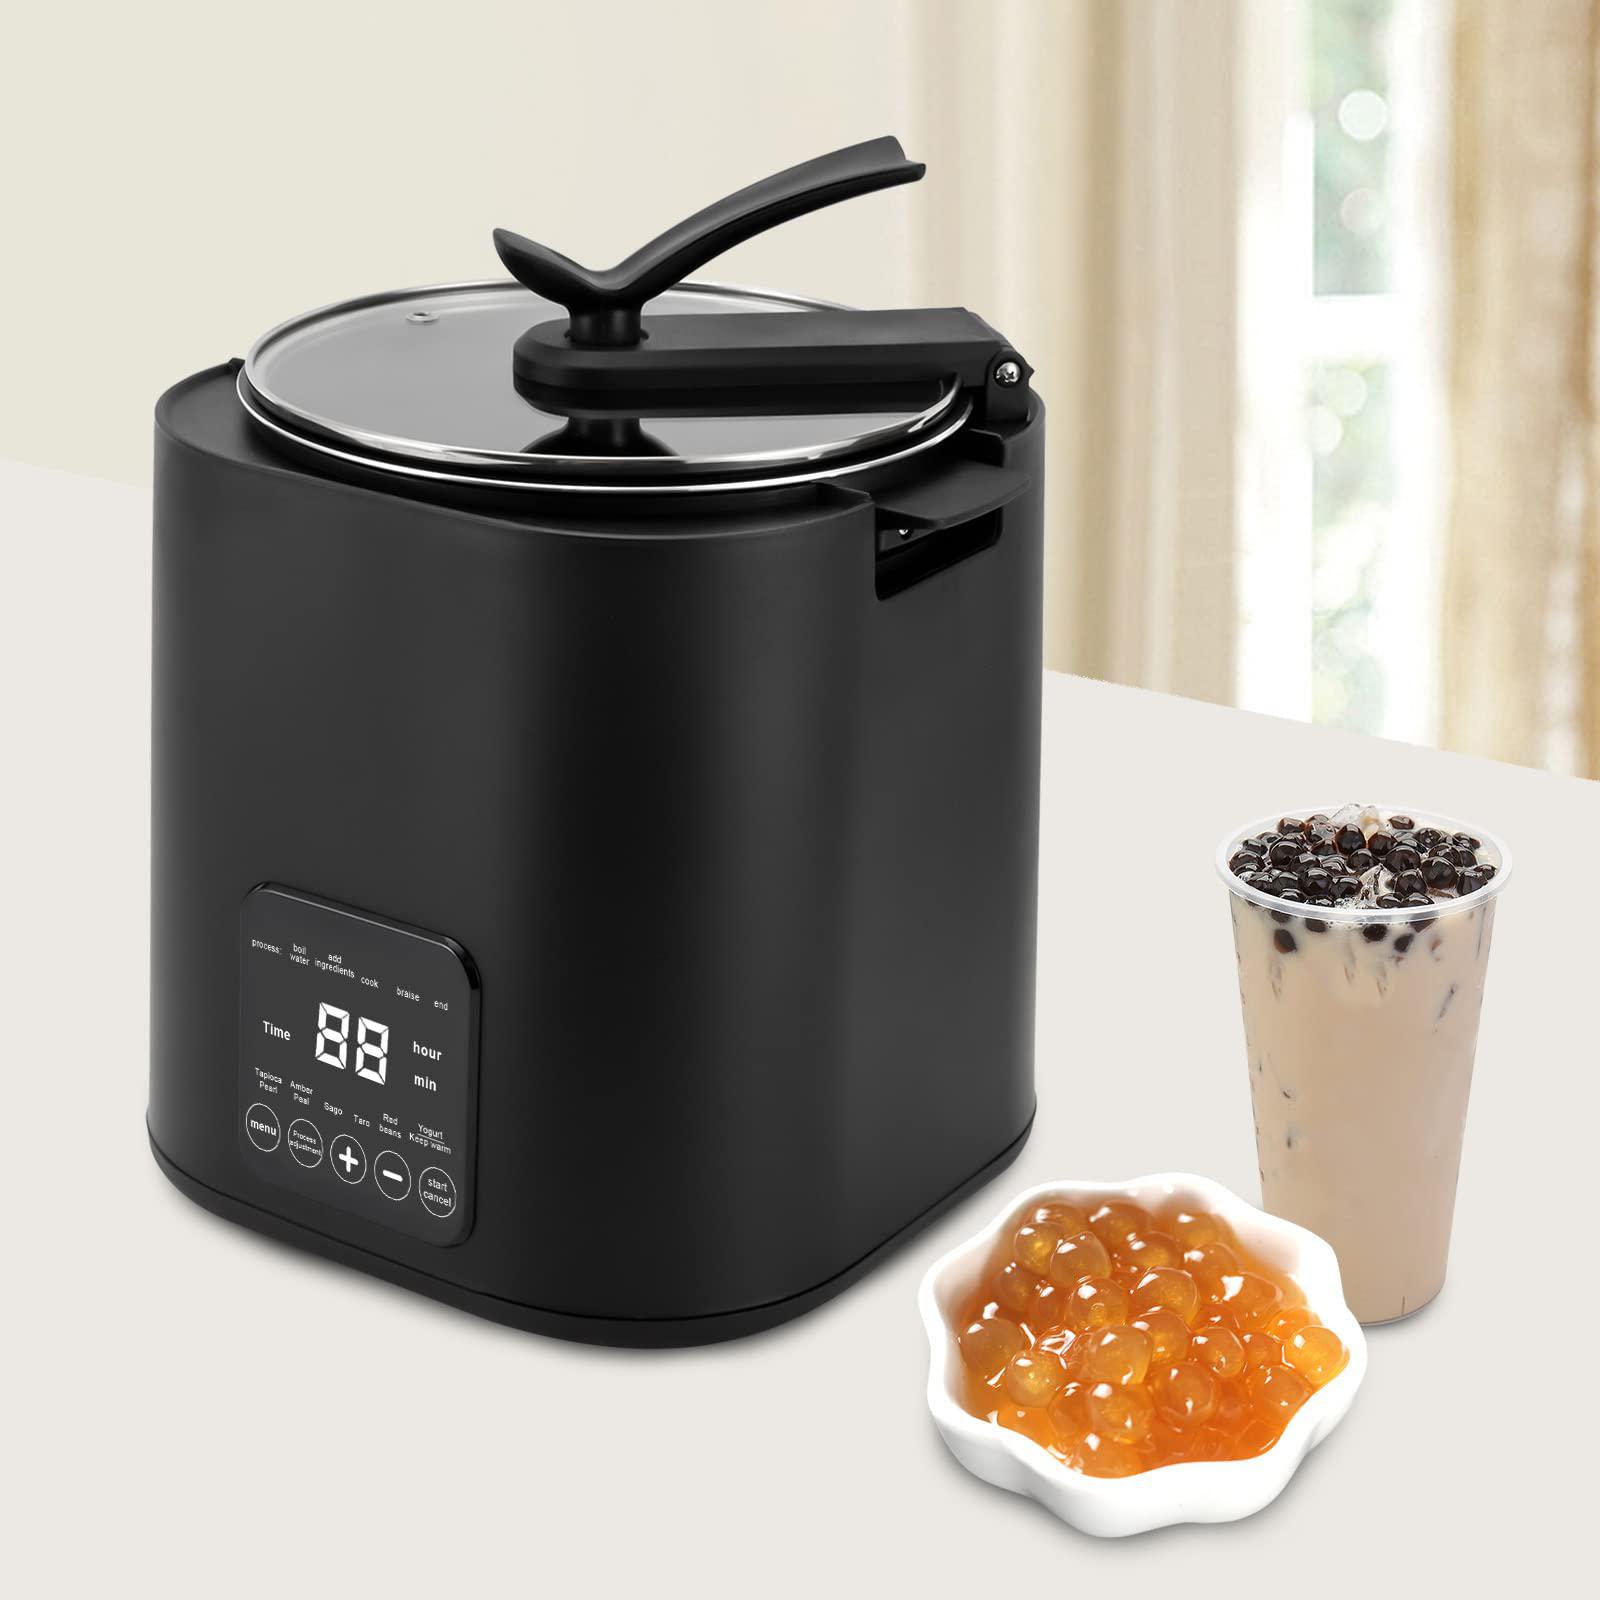 SNKOURIN commercial boba maker, 9l fully automatic pearl pot pearl tapioca cooker boba maker machine with touchscreen,boba cooker for 